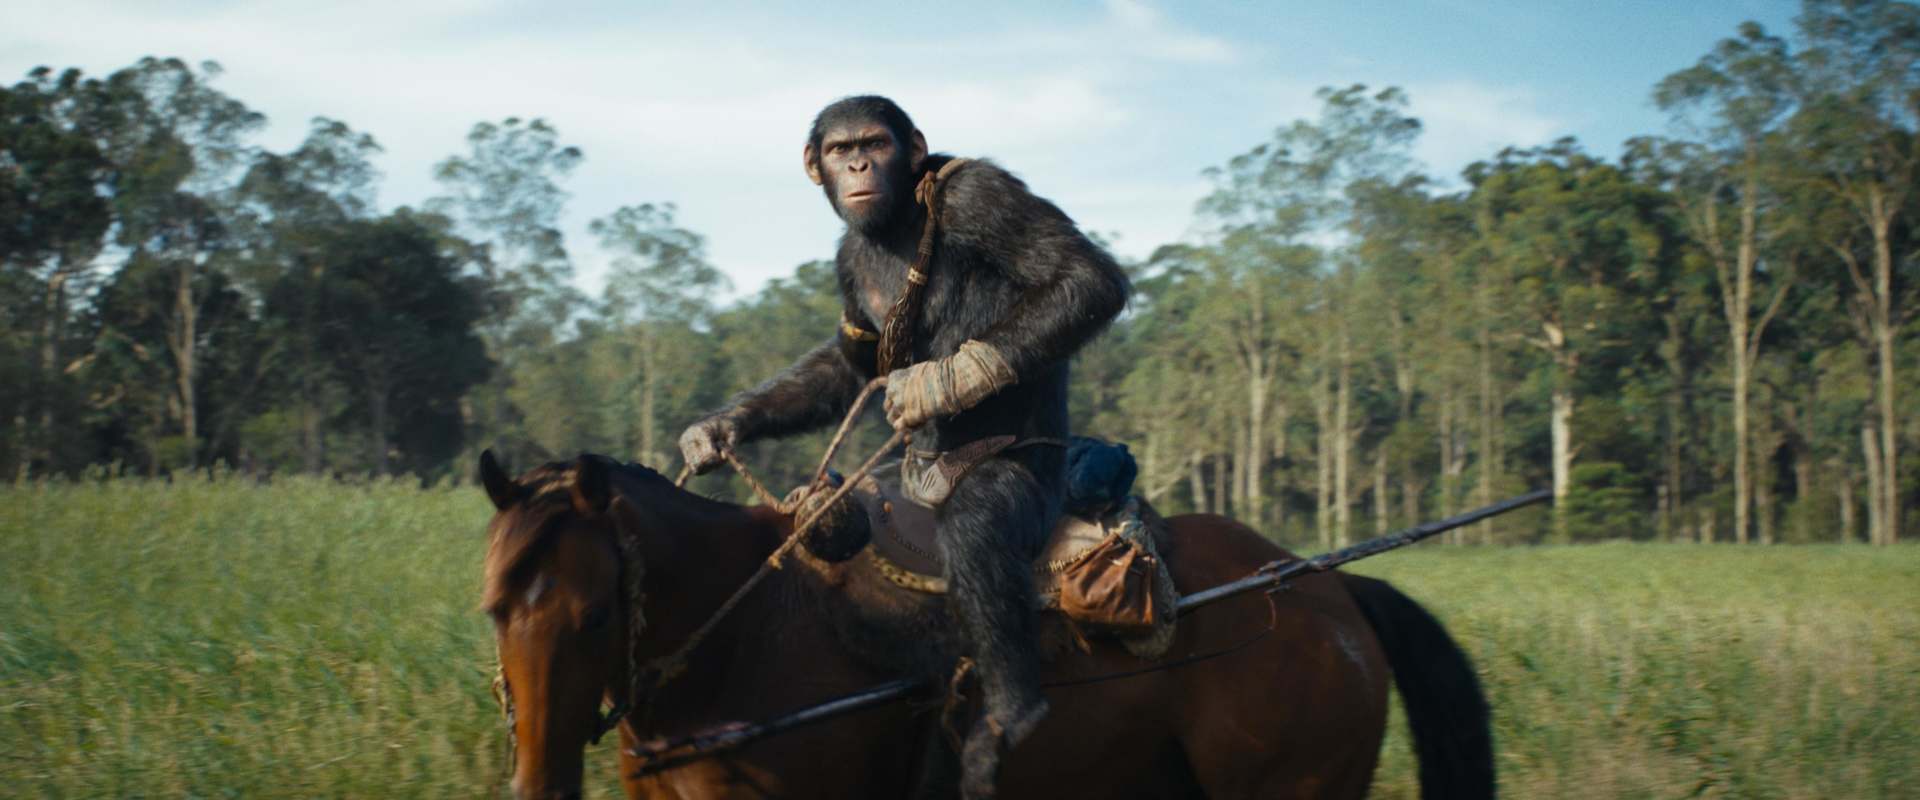 Kingdom of the Planet of the Apes background 2